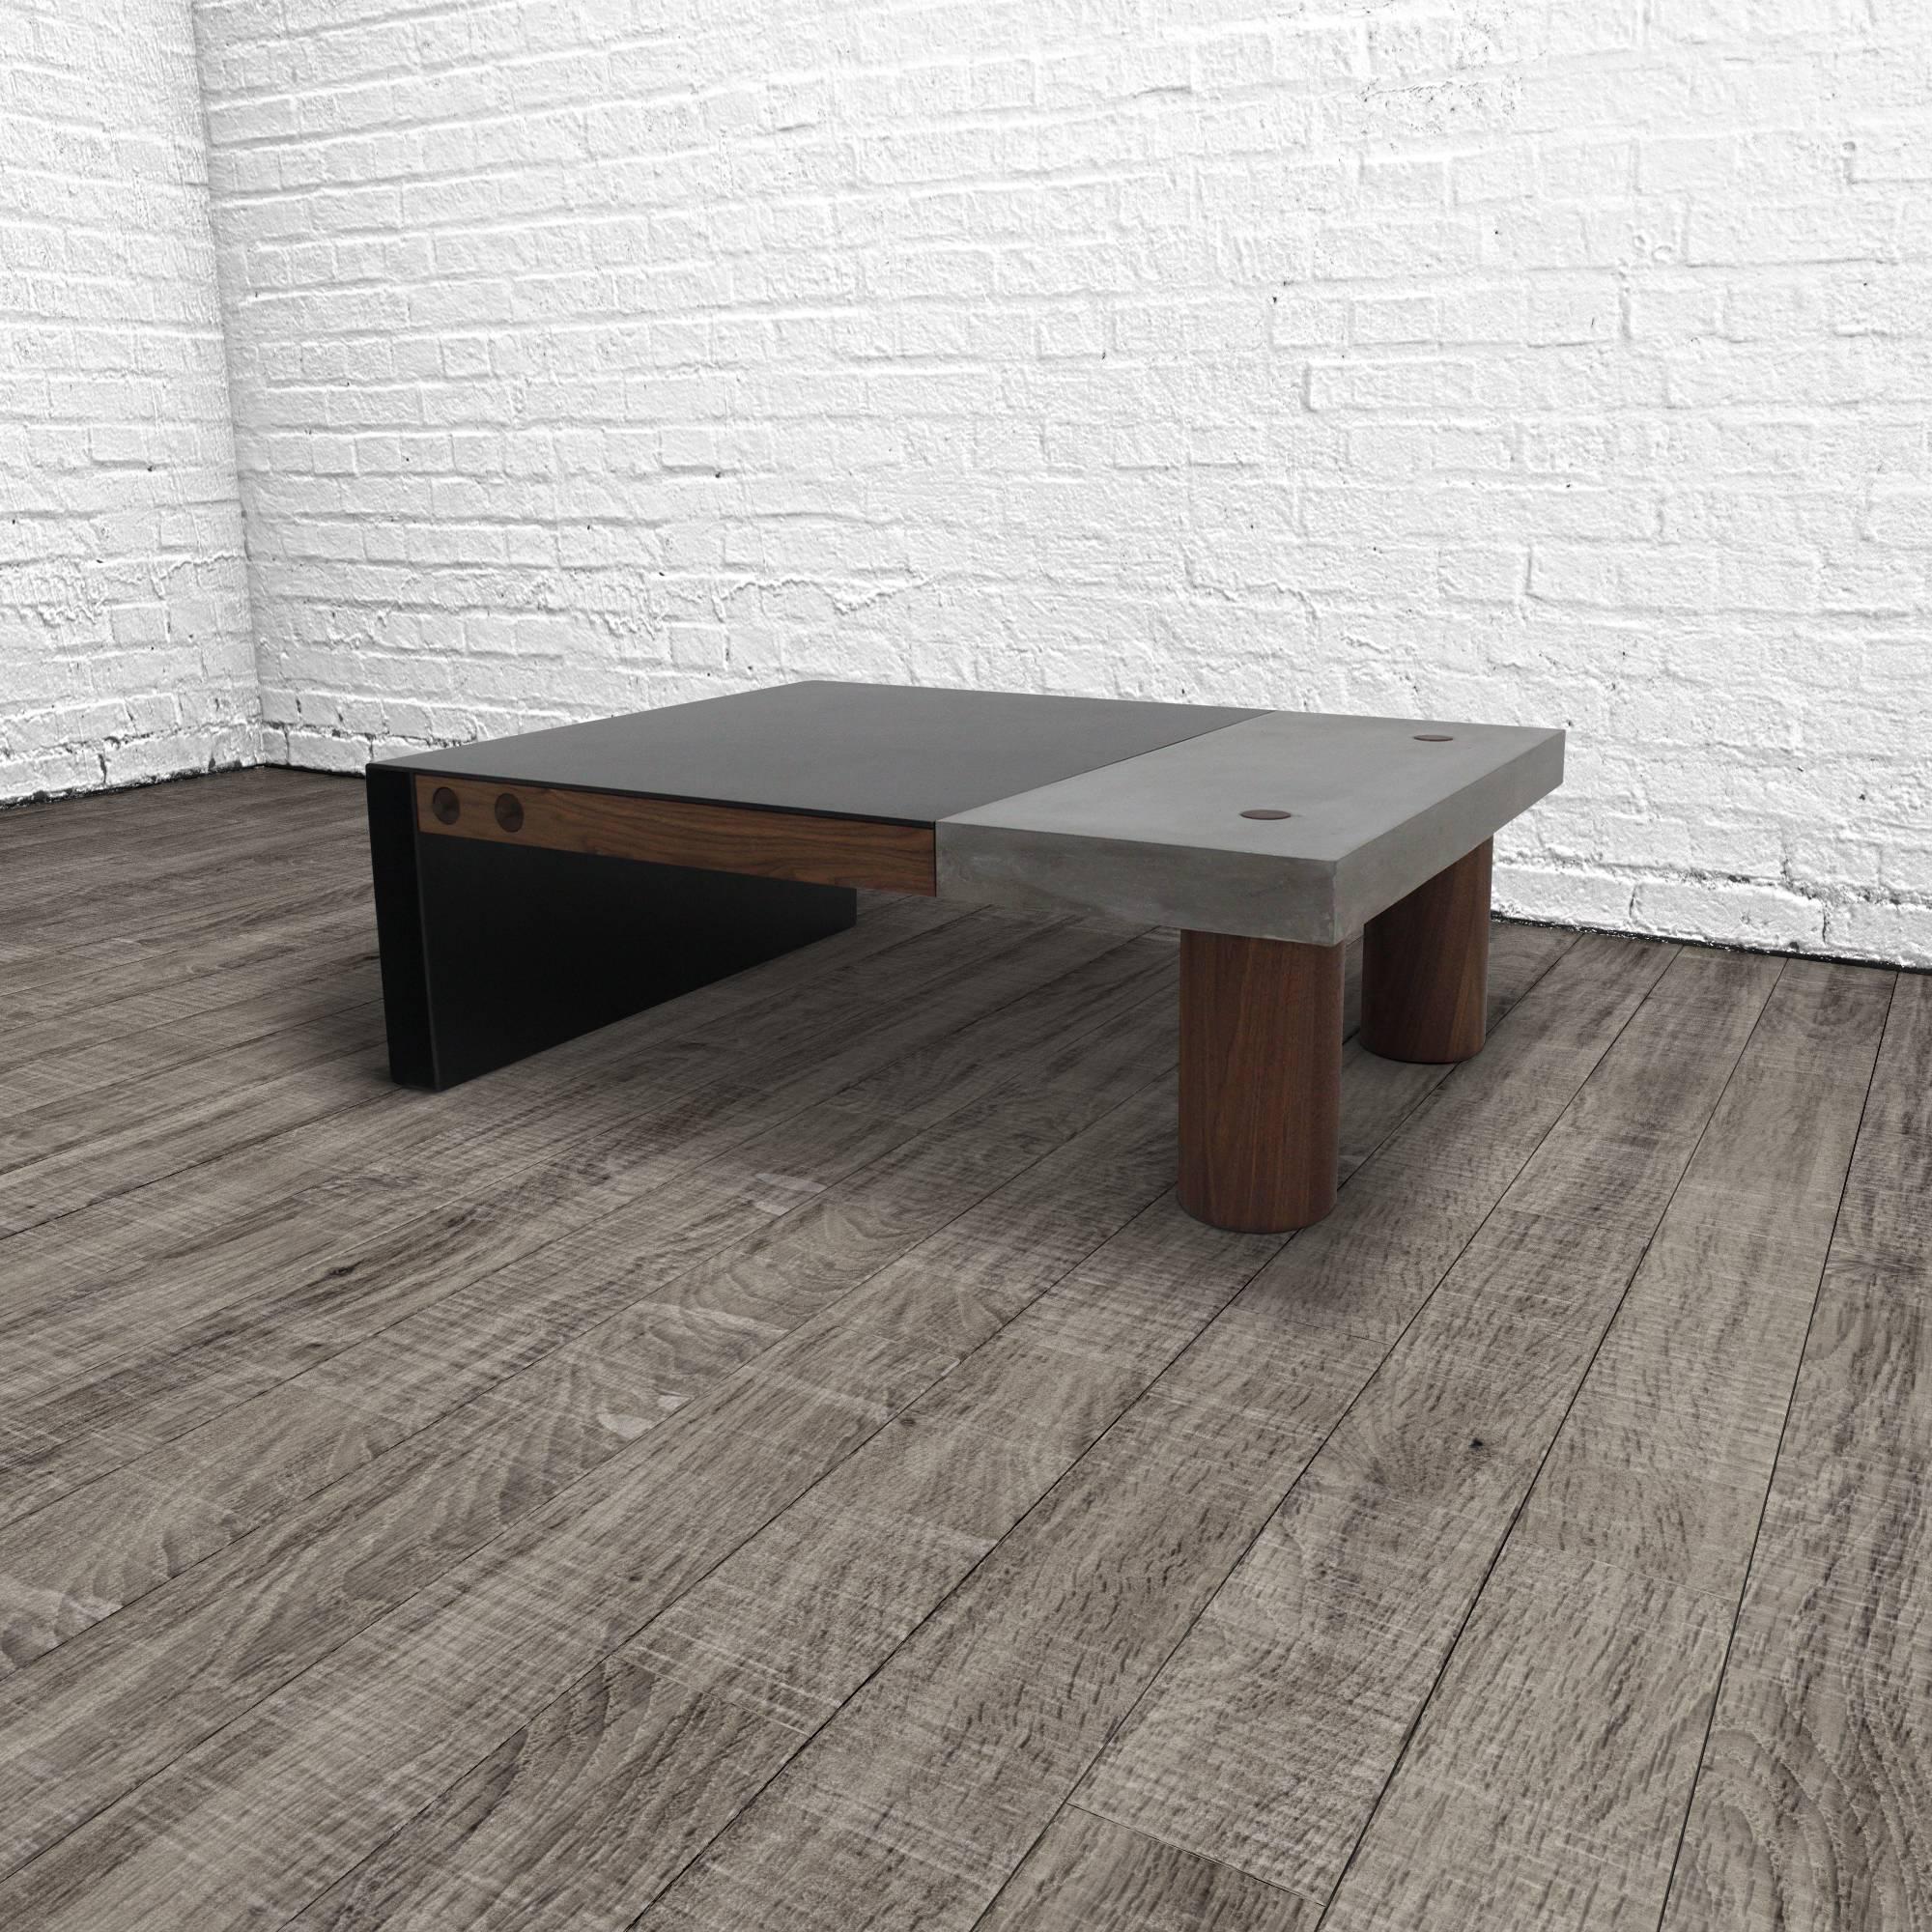 The paradigm coffee table seamlessly integrates three elemental materials, concrete, steel and wood. The combination of cast concrete with hand-turned walnut legs and thru-tenon joinery married to hand-blackened steel with an oil and wax finish